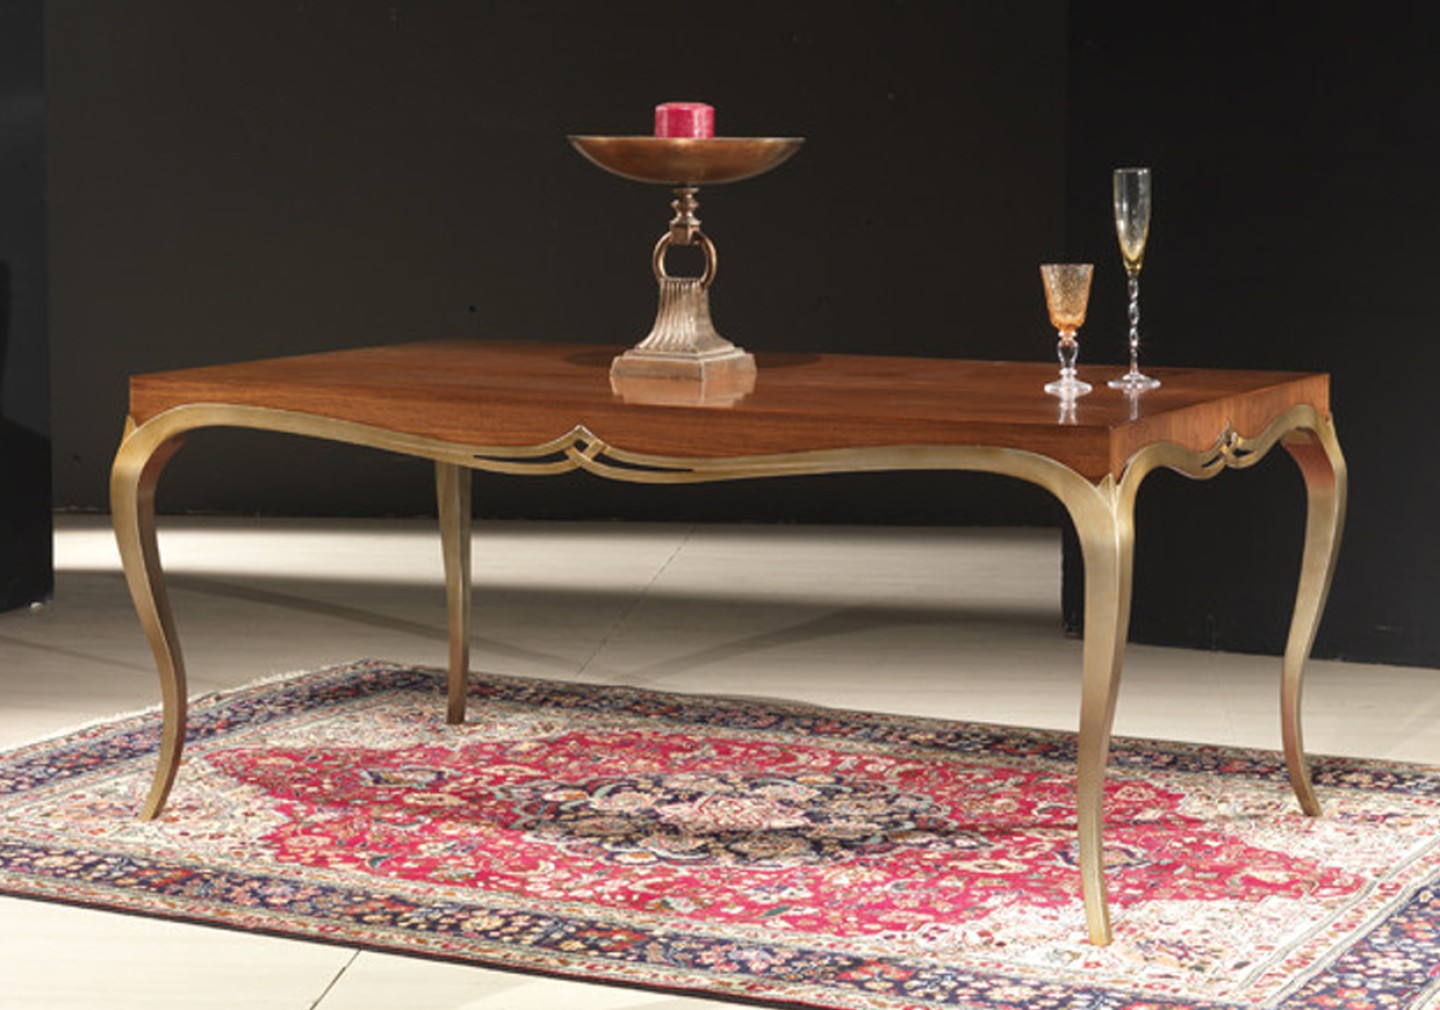 THE APOLLO CLASSIC DINING TABLE